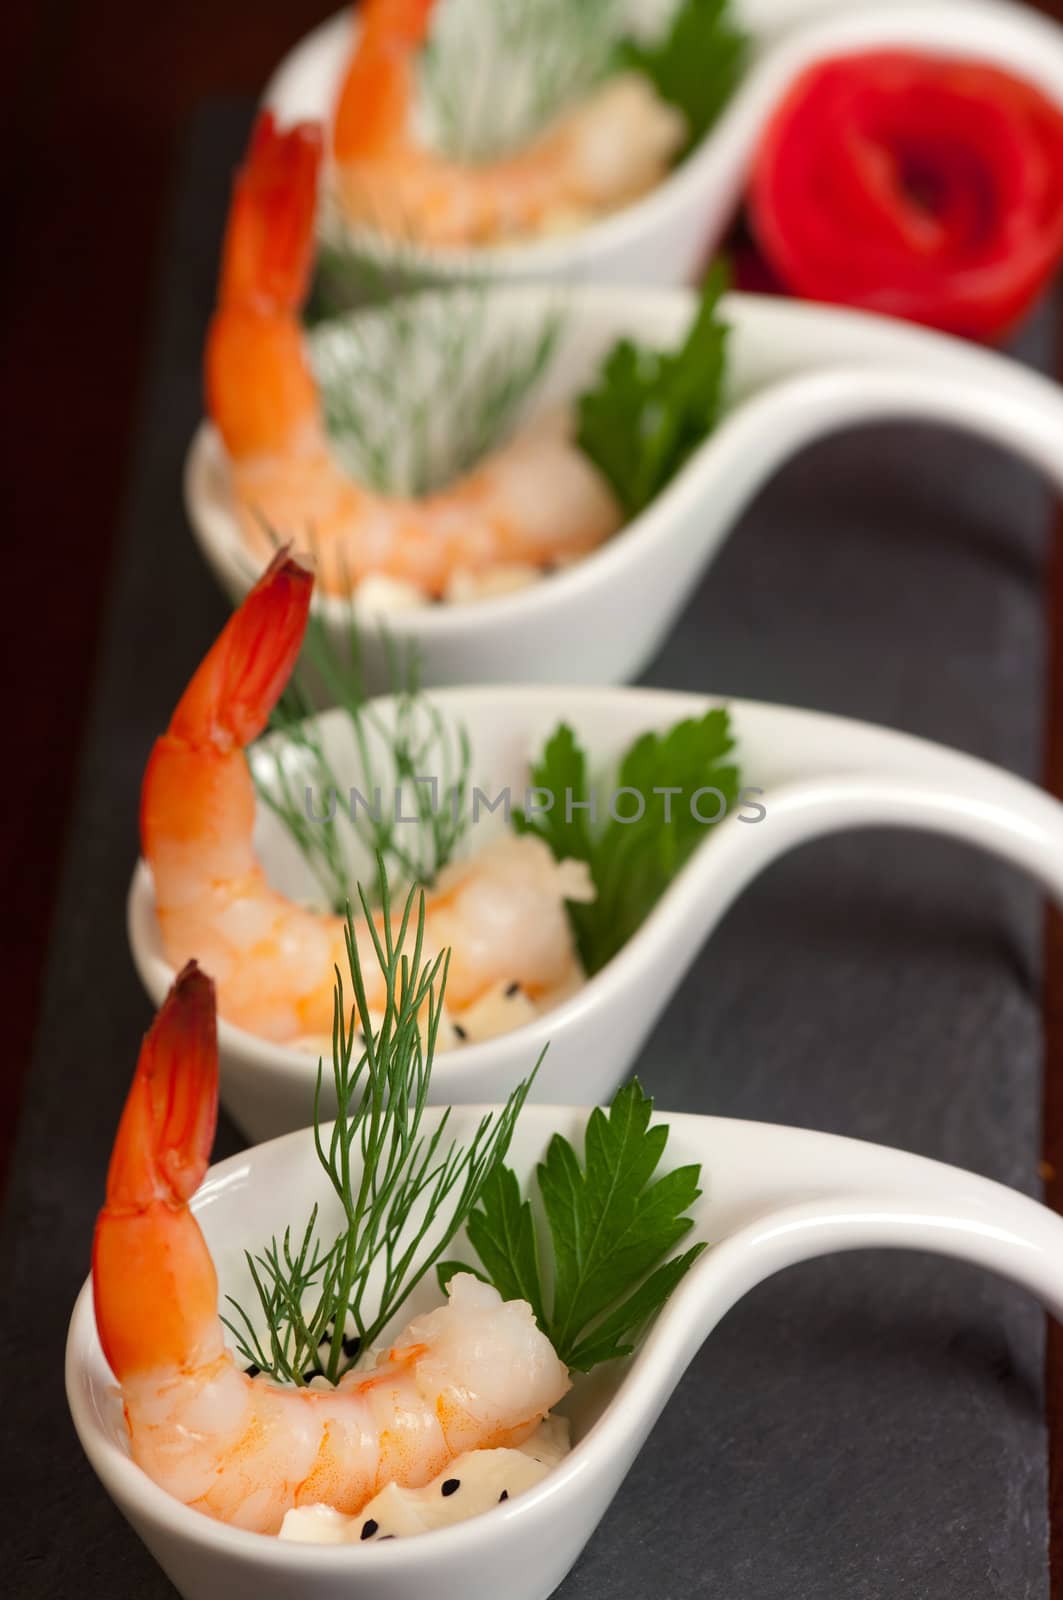 Shrimp appetizers during a party